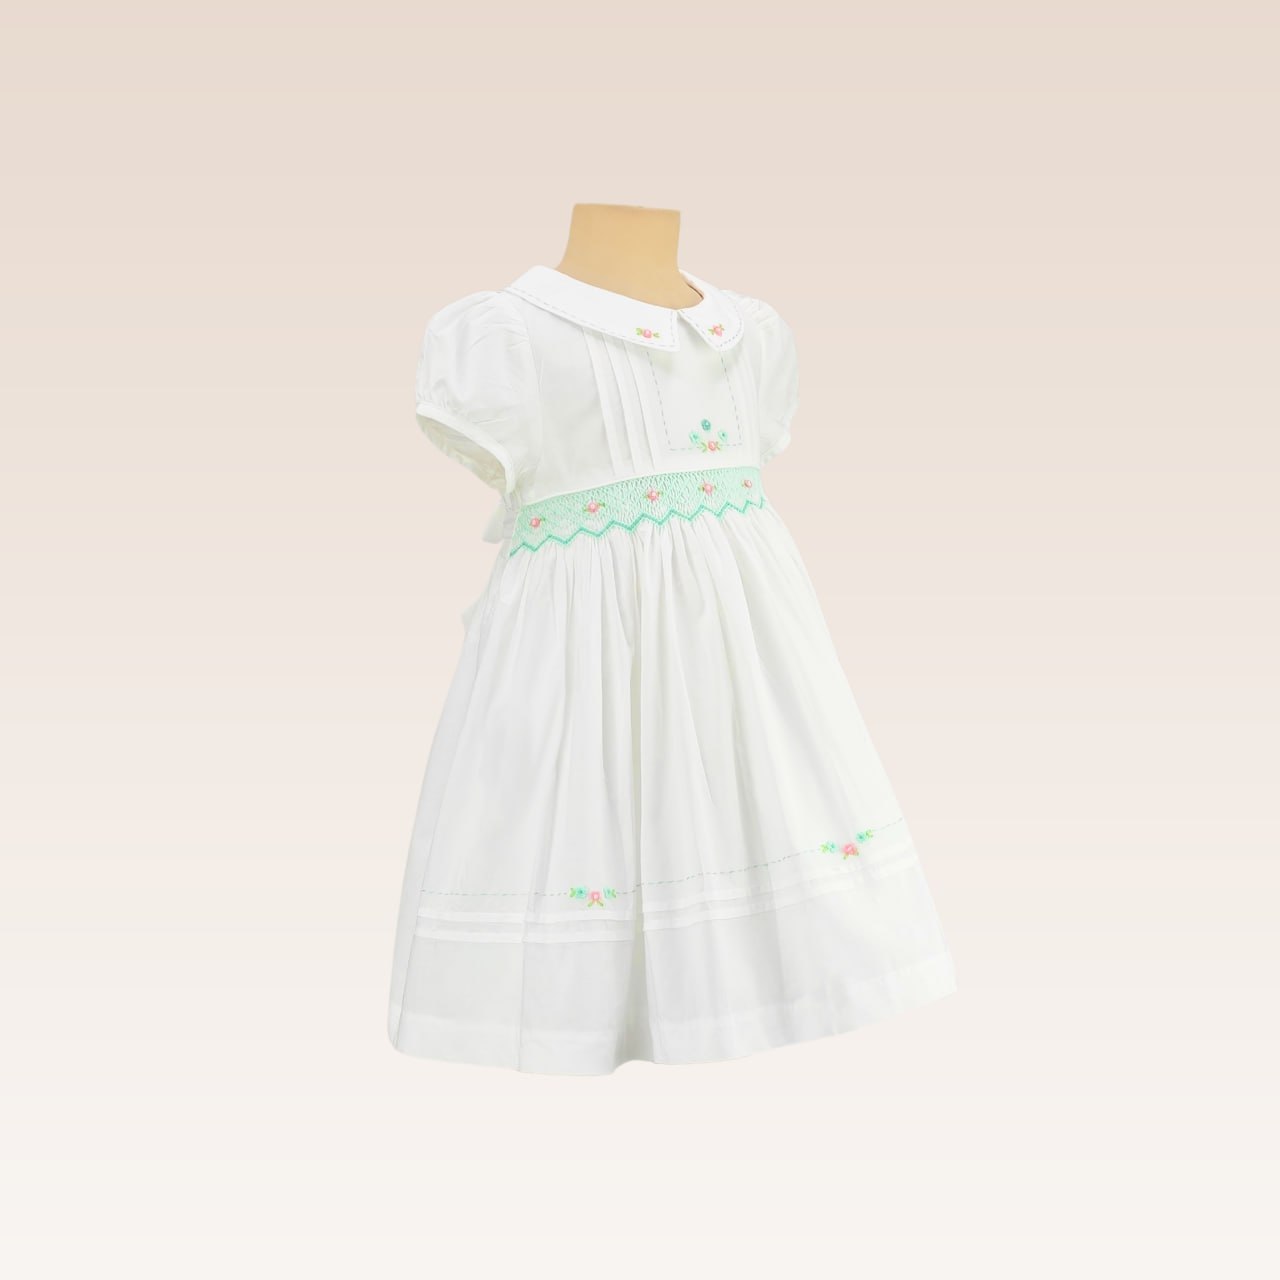 Hazel Baby Girlsl Ivory Dress with Smock and Embroidery details